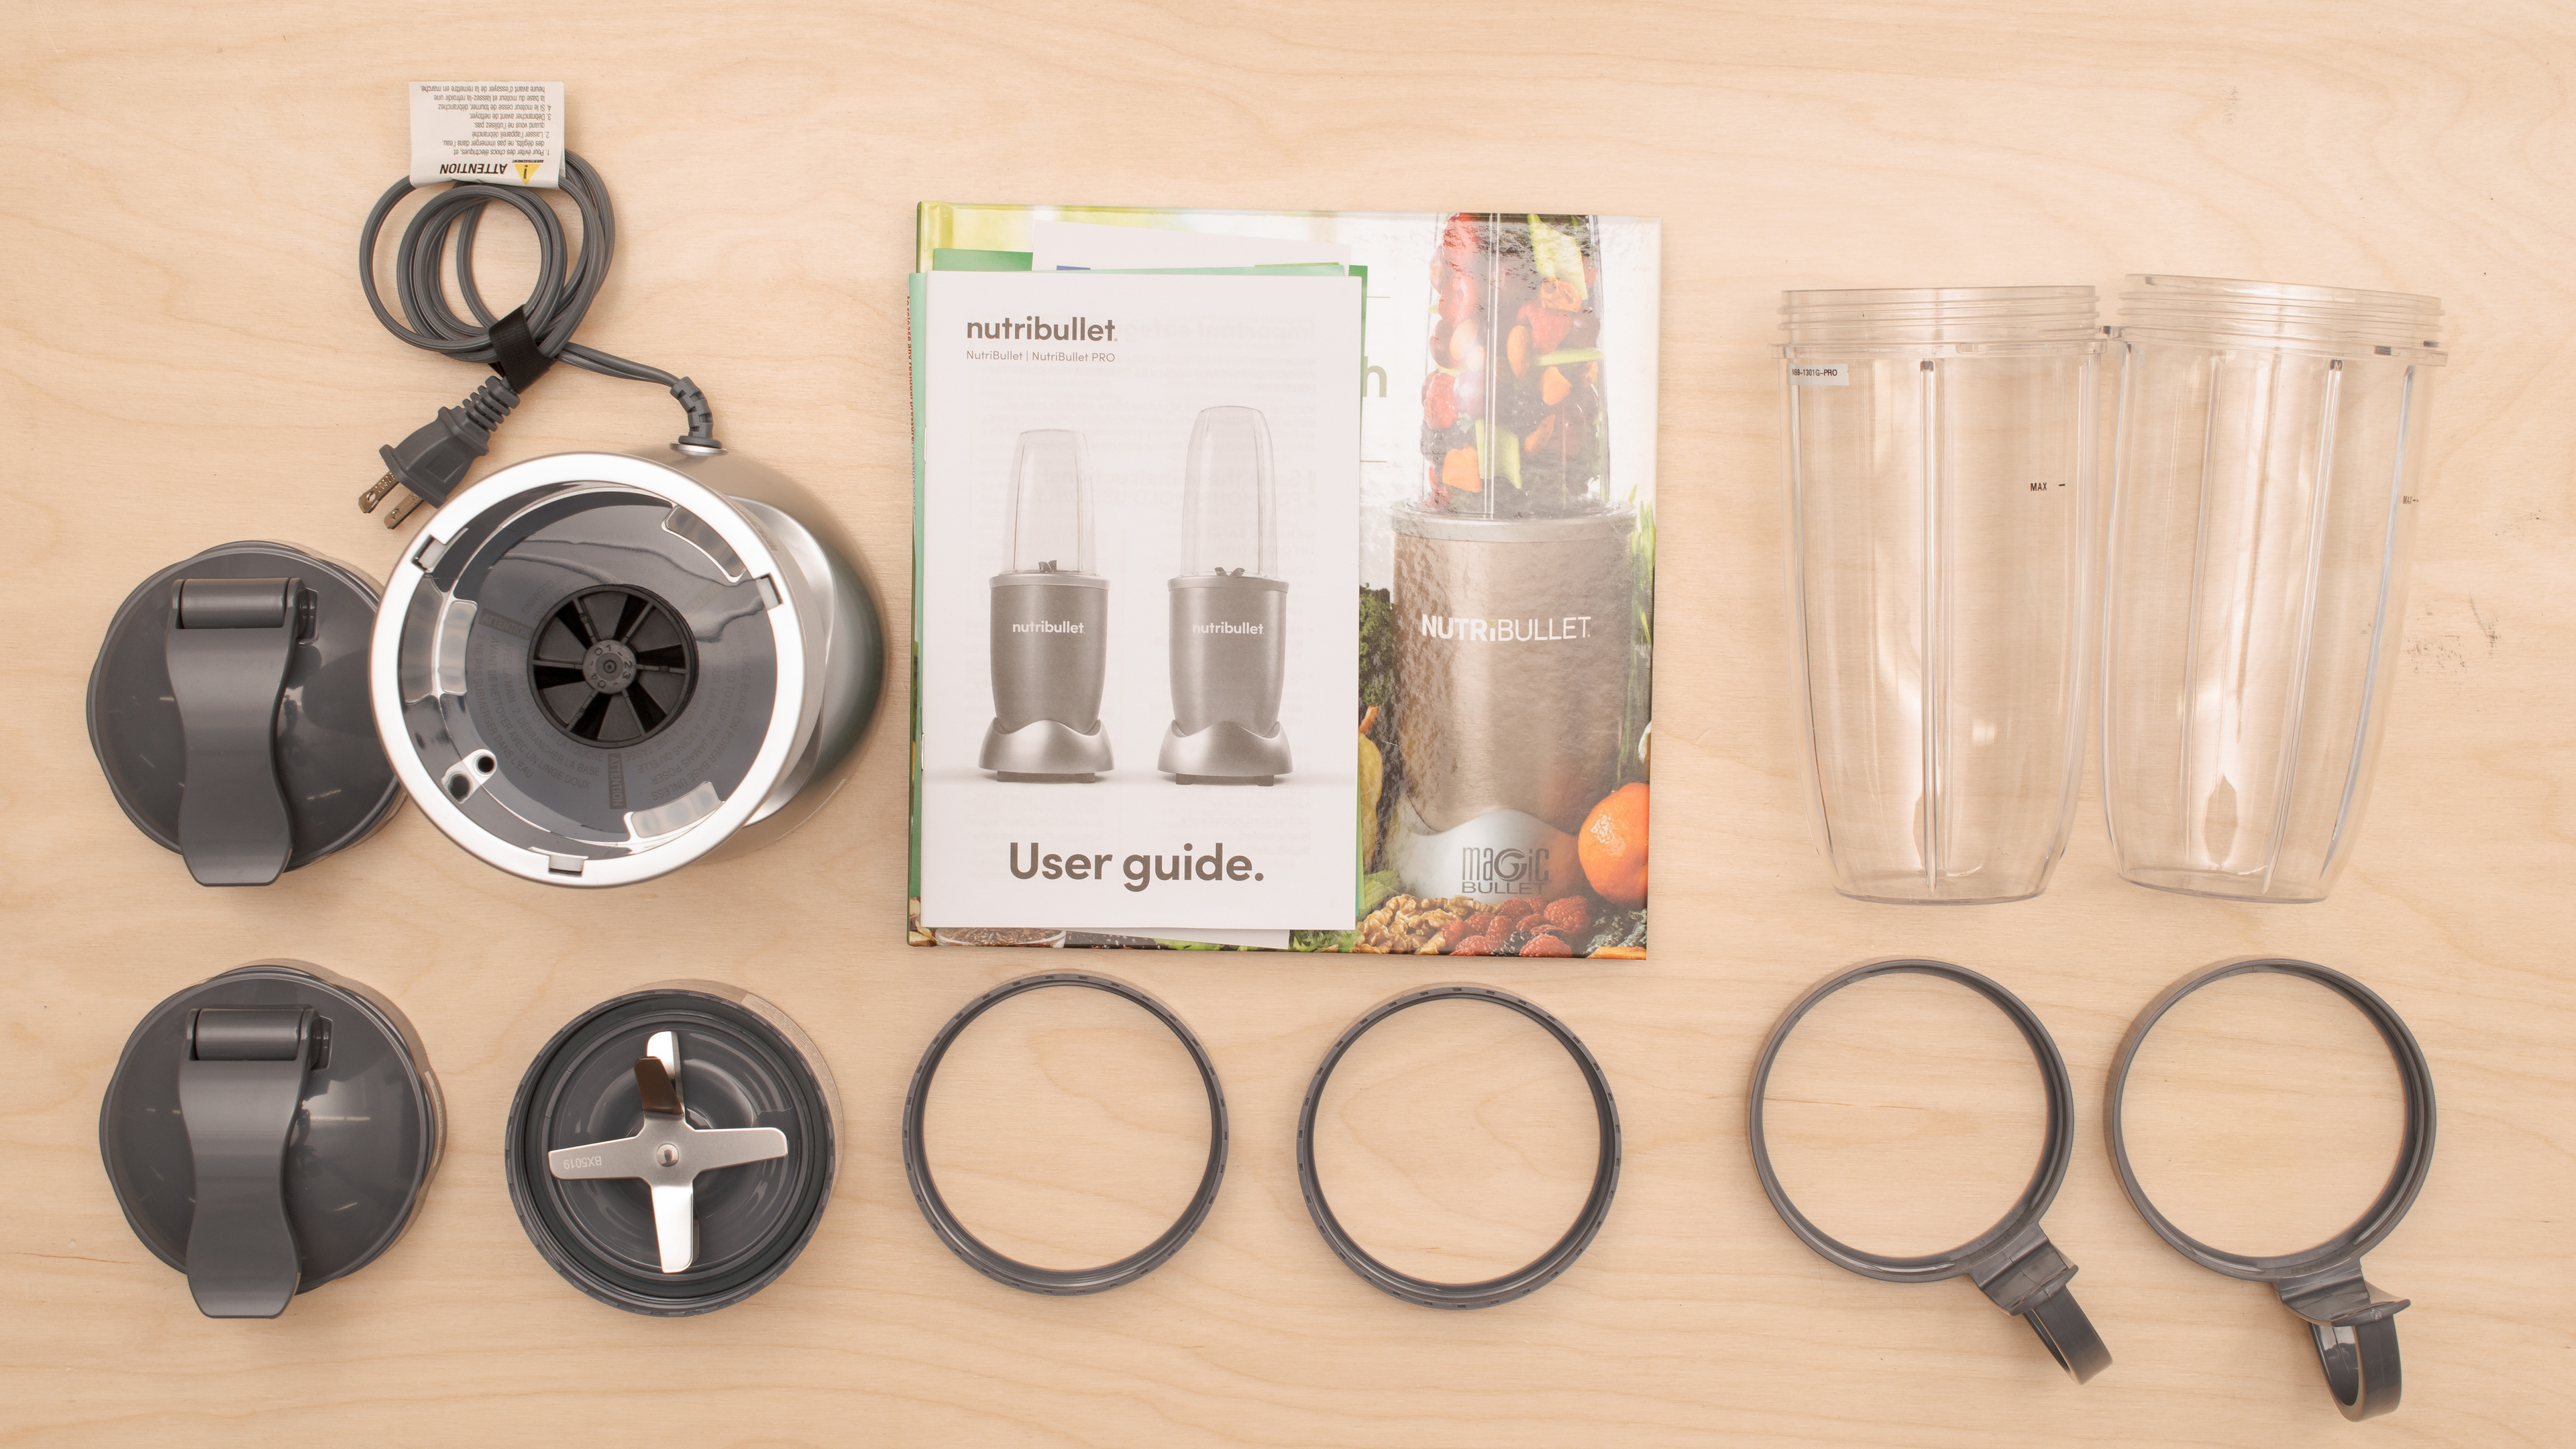 To-go lids, personal jars, and cup rings are some accessories that can be included with personal blenders (NutriBullet Pro 900)